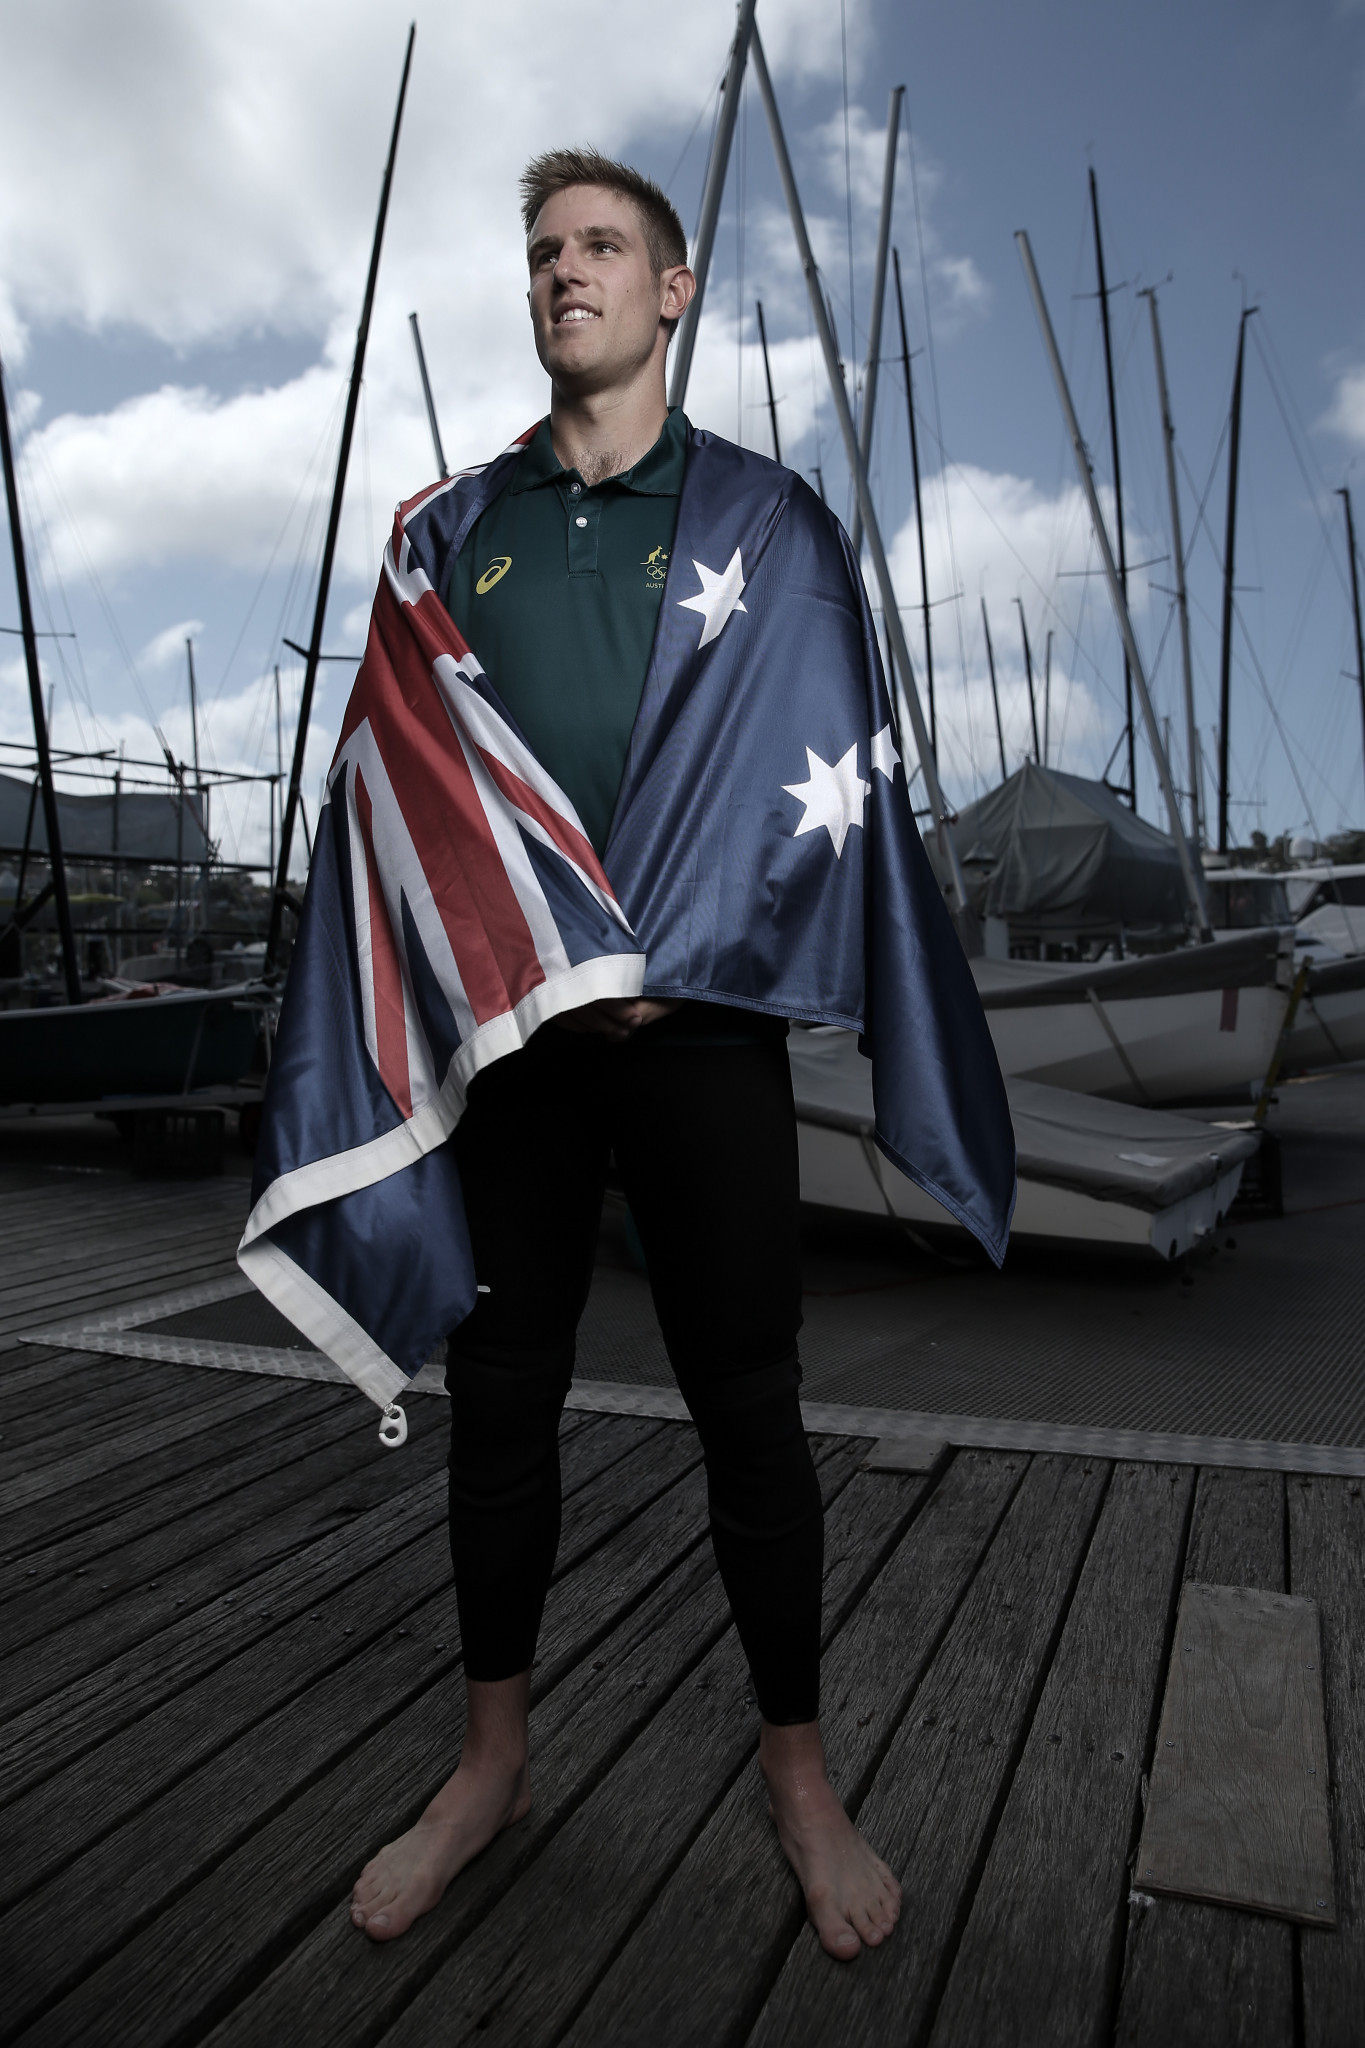 Australia's Matt Wearn was part of a popular podium on home soil after a strong last day put him into silver ©Getty Images